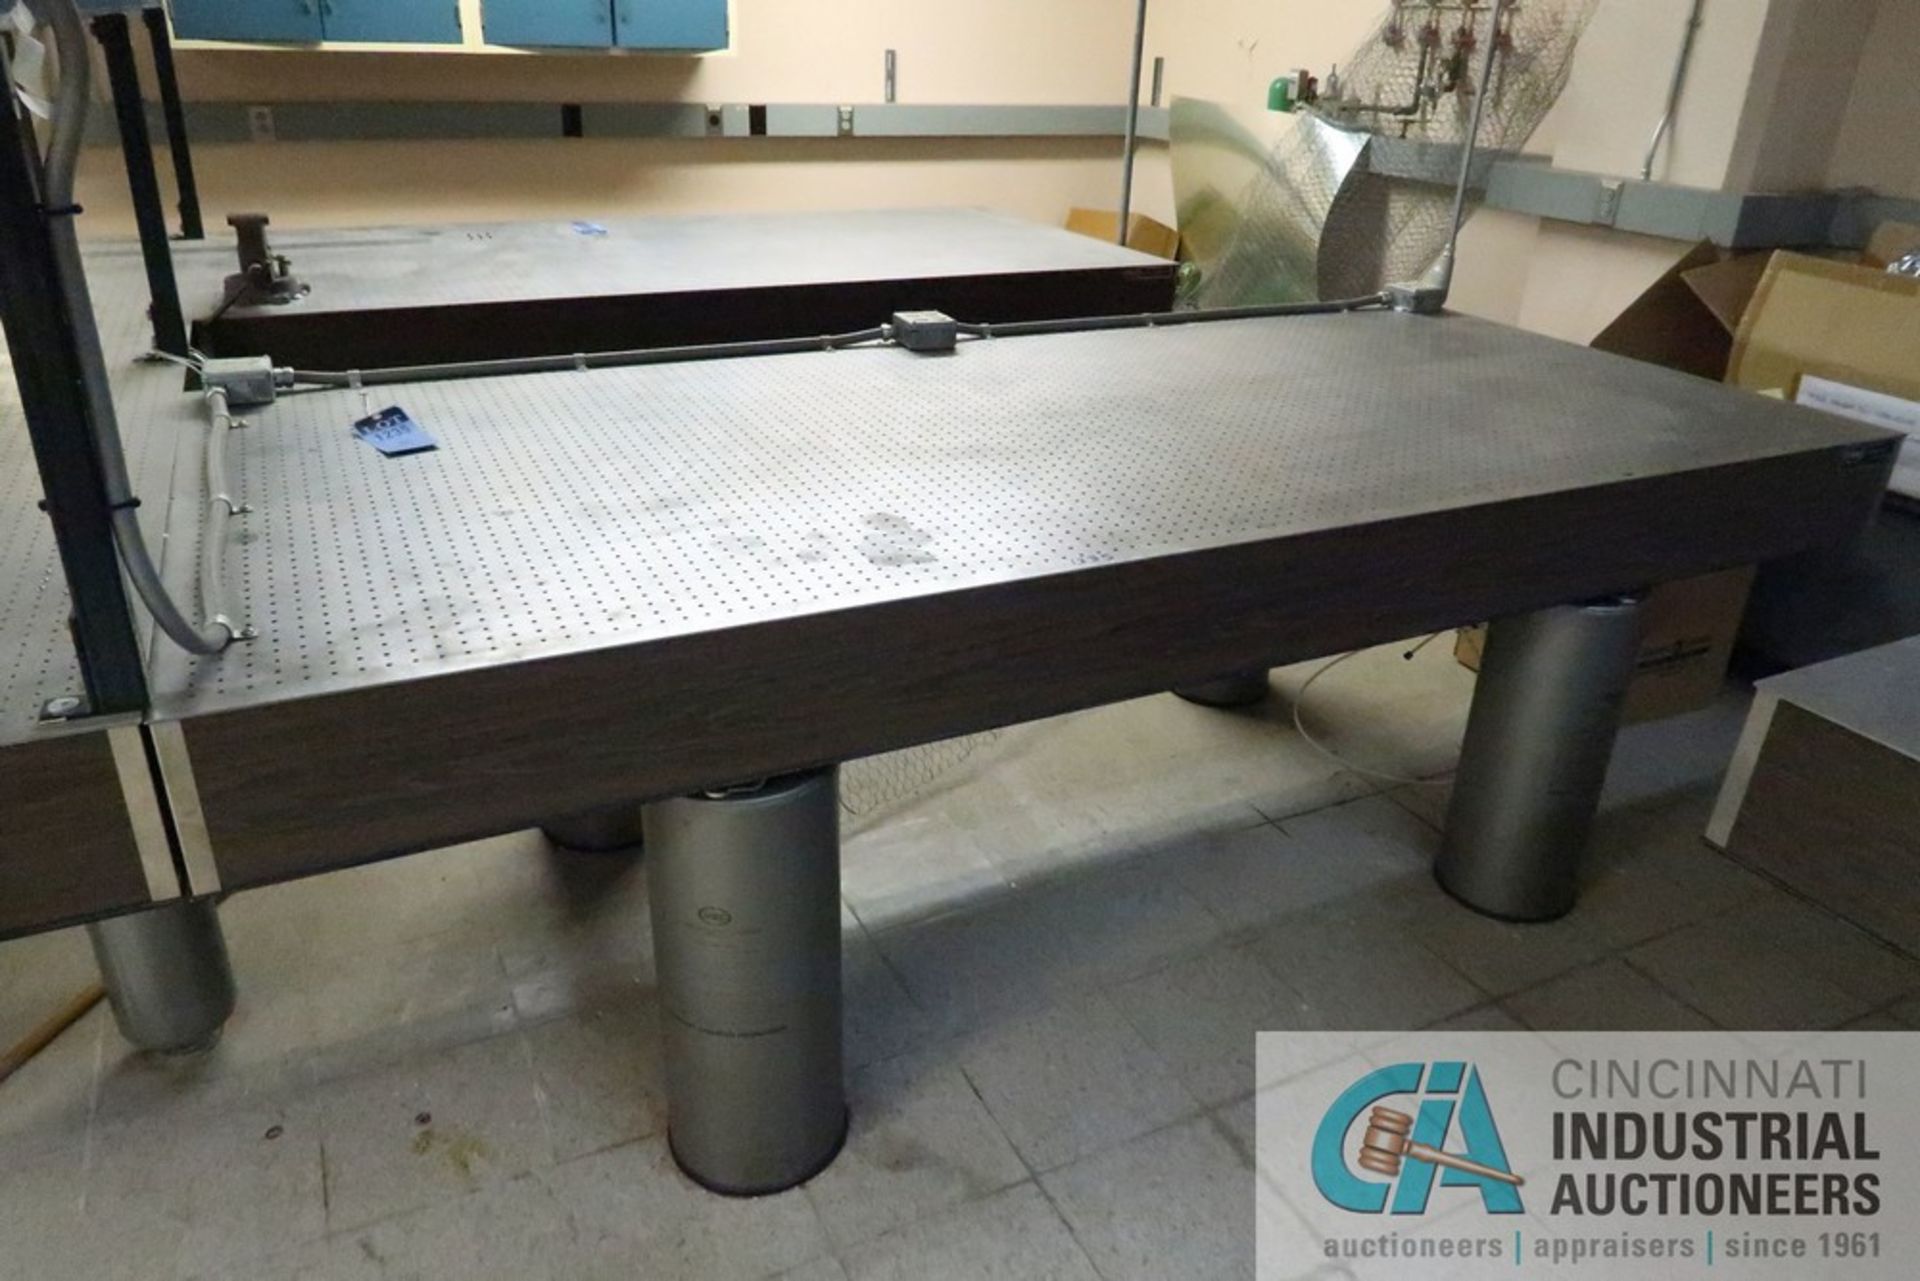 108" X 48" NEWPORT DRILLED AND TAPPED LAYOUT TABLE (ROOM 7) - Located in the basement